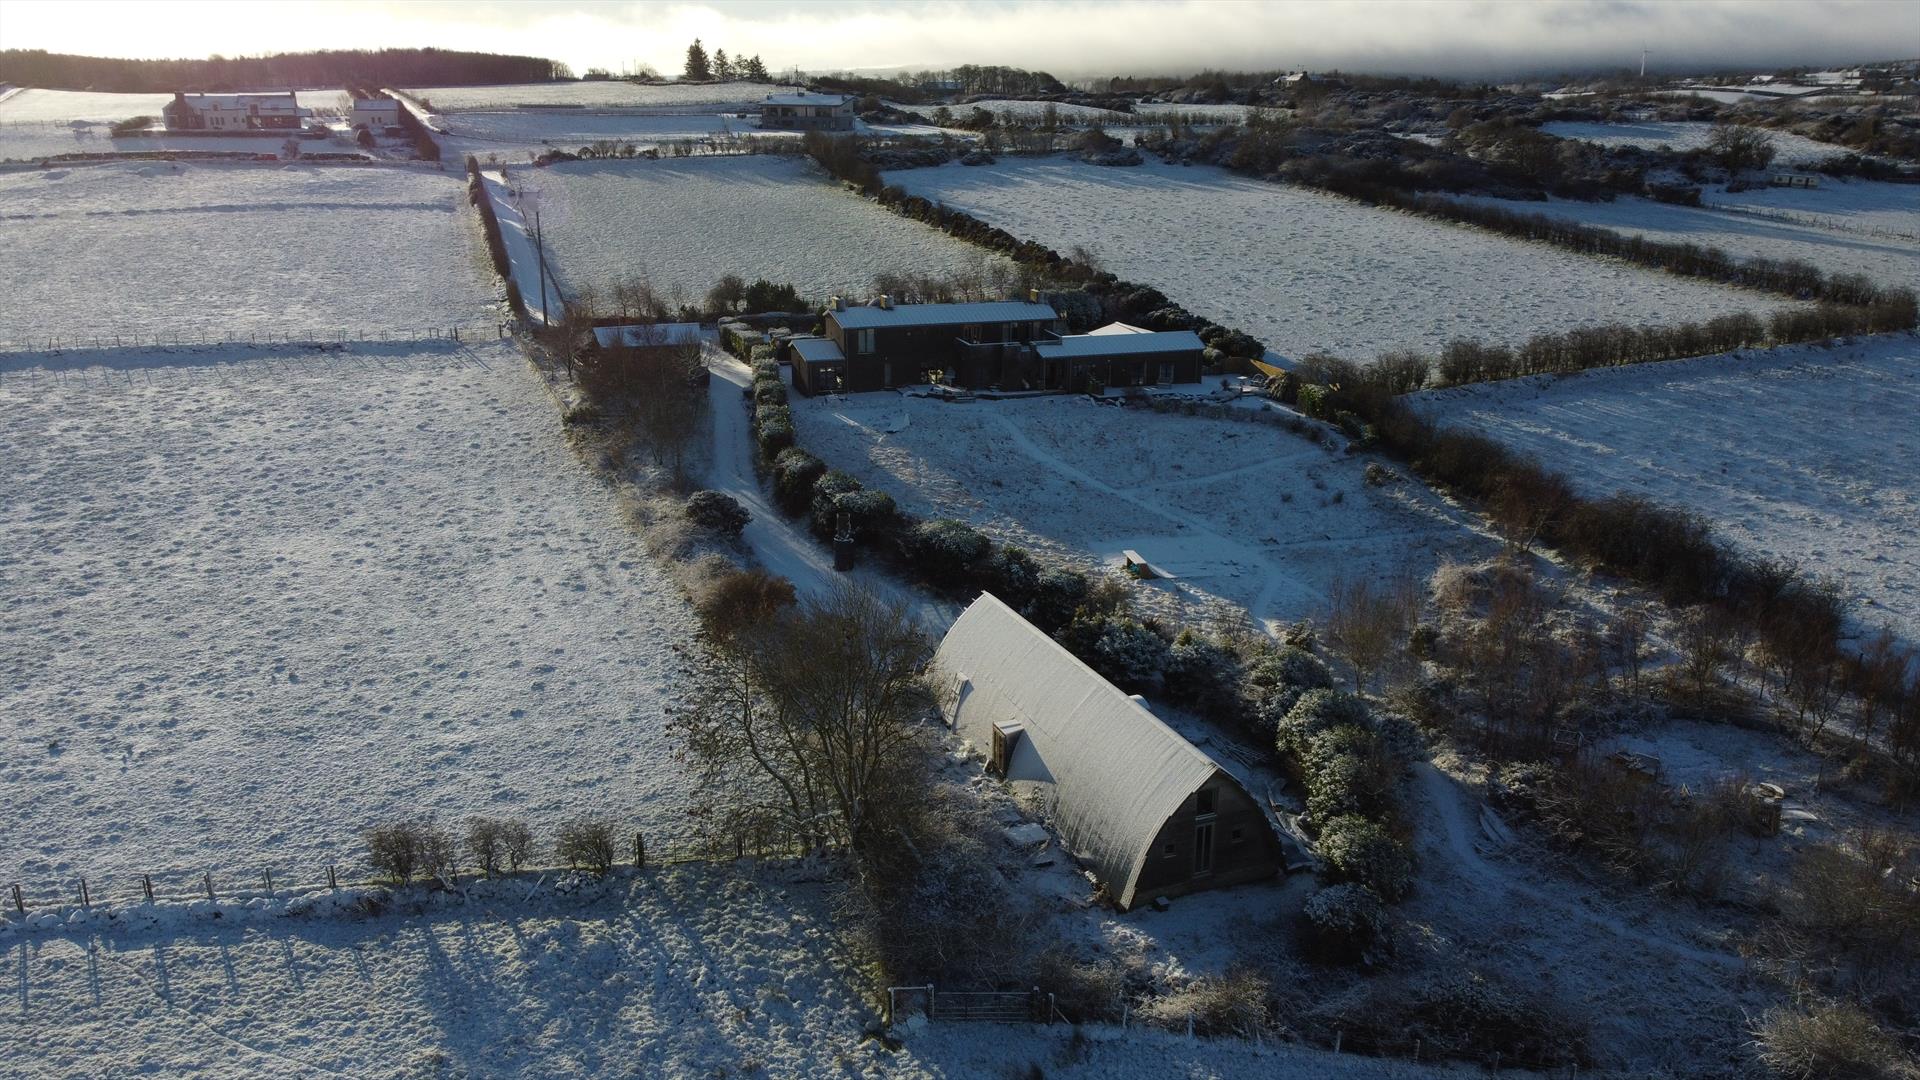 An aerial view of the studio on a Snowy winter day with the snow glistening on the curved roof.